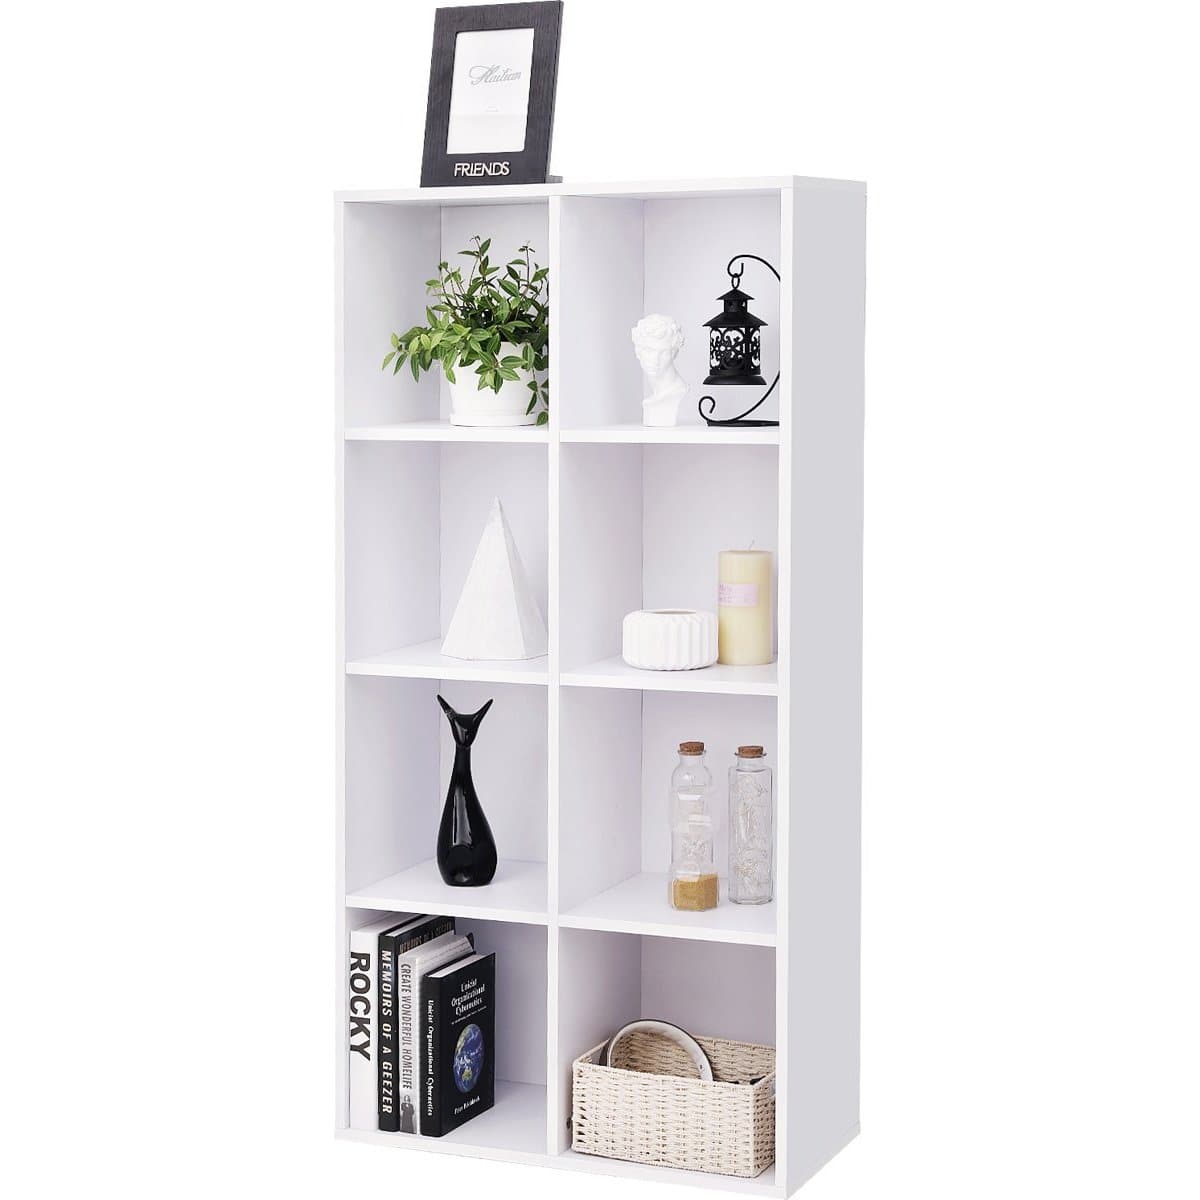 Nancy's Bookcase With 8 Compartments - Wooden Shelves - Freestanding Cabinet - Storage For Office Or Home - White